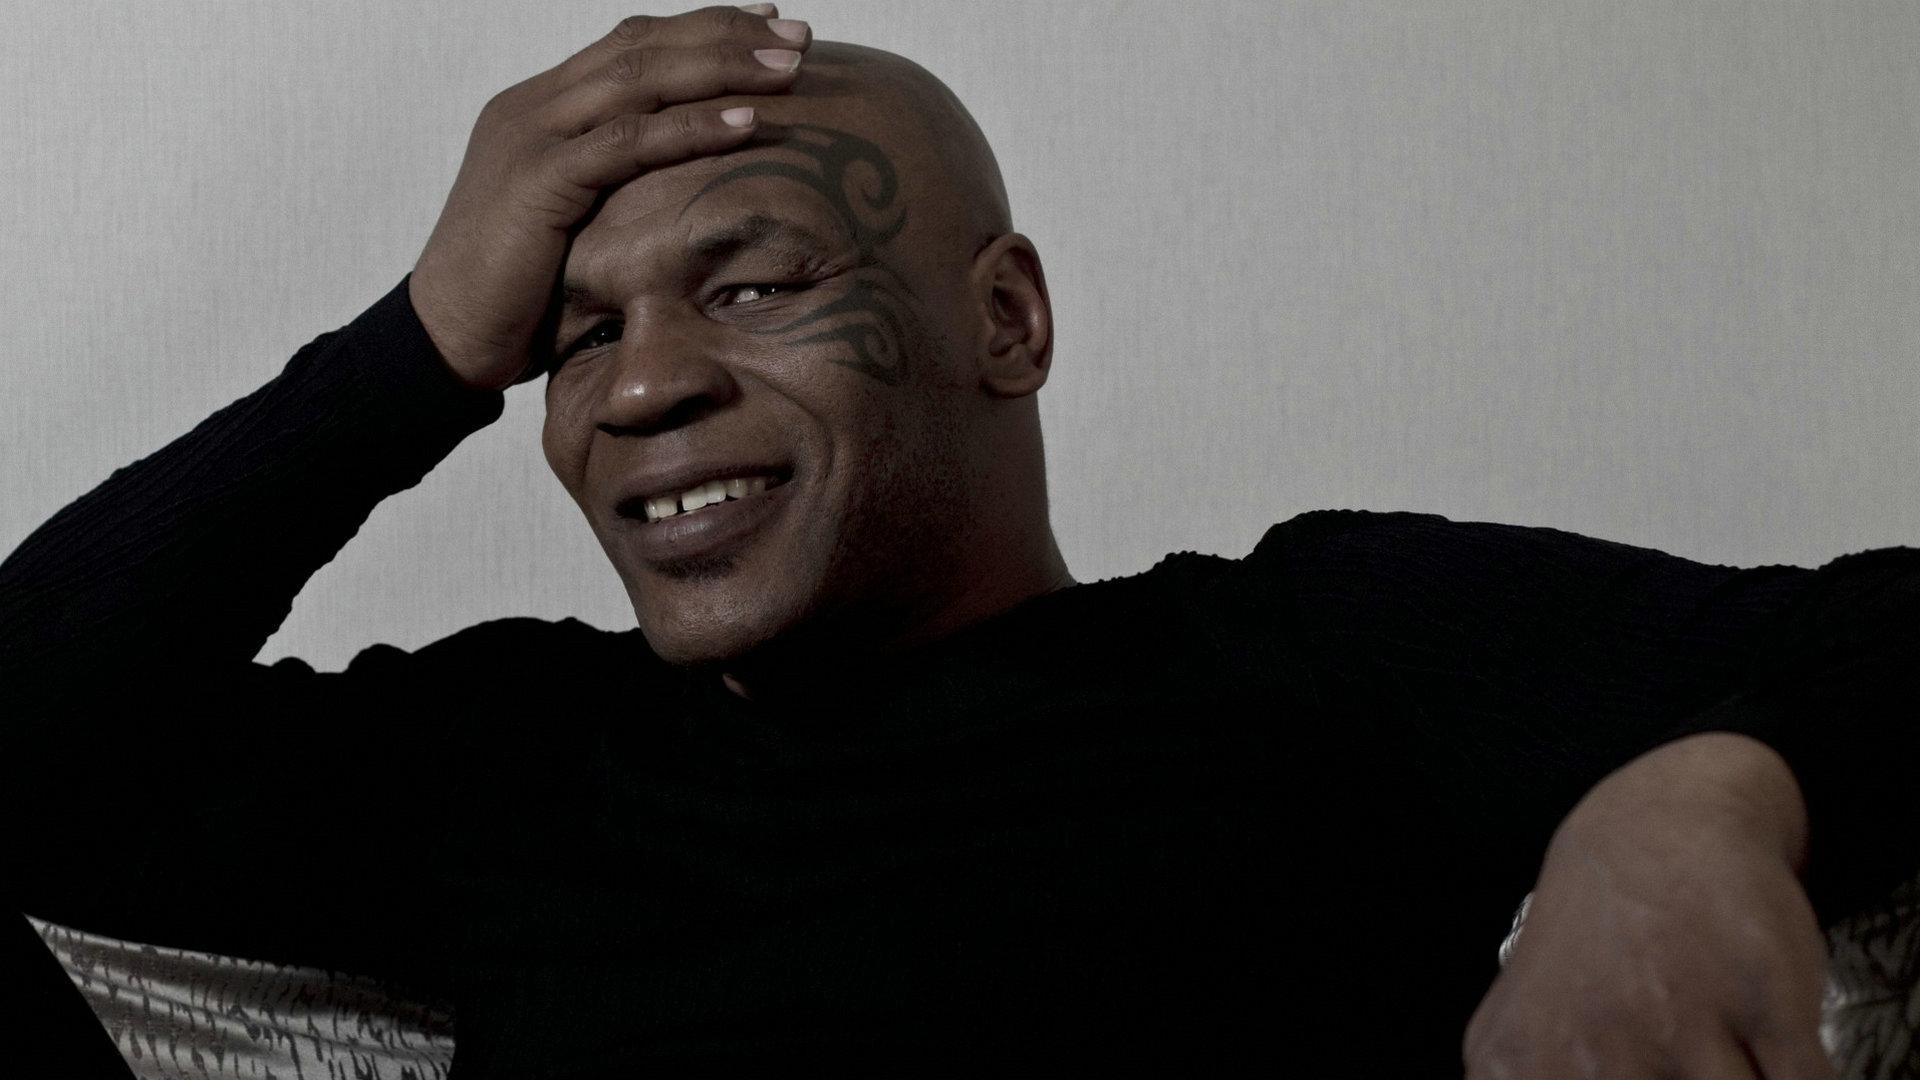 Wallpaper Boxing Mike Tyson Tyson images for desktop section спорт   download